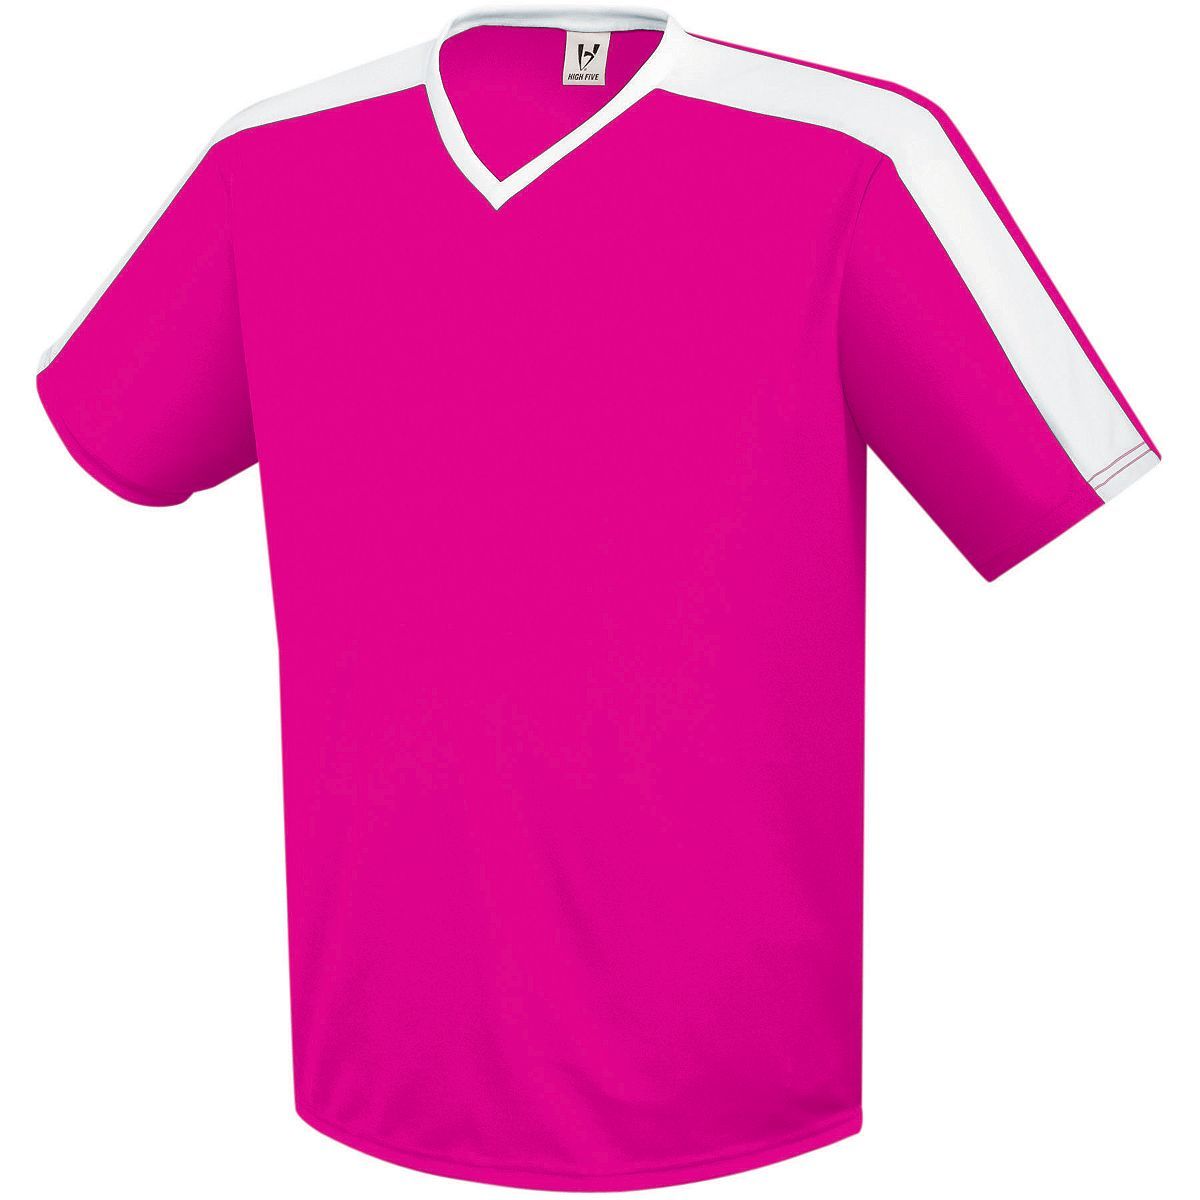 High 5 Youth Genesis Soccer Jersey in Raspberry/White  -Part of the Youth, Youth-Jersey, High5-Products, Soccer, Shirts, All-Sports-1 product lines at KanaleyCreations.com